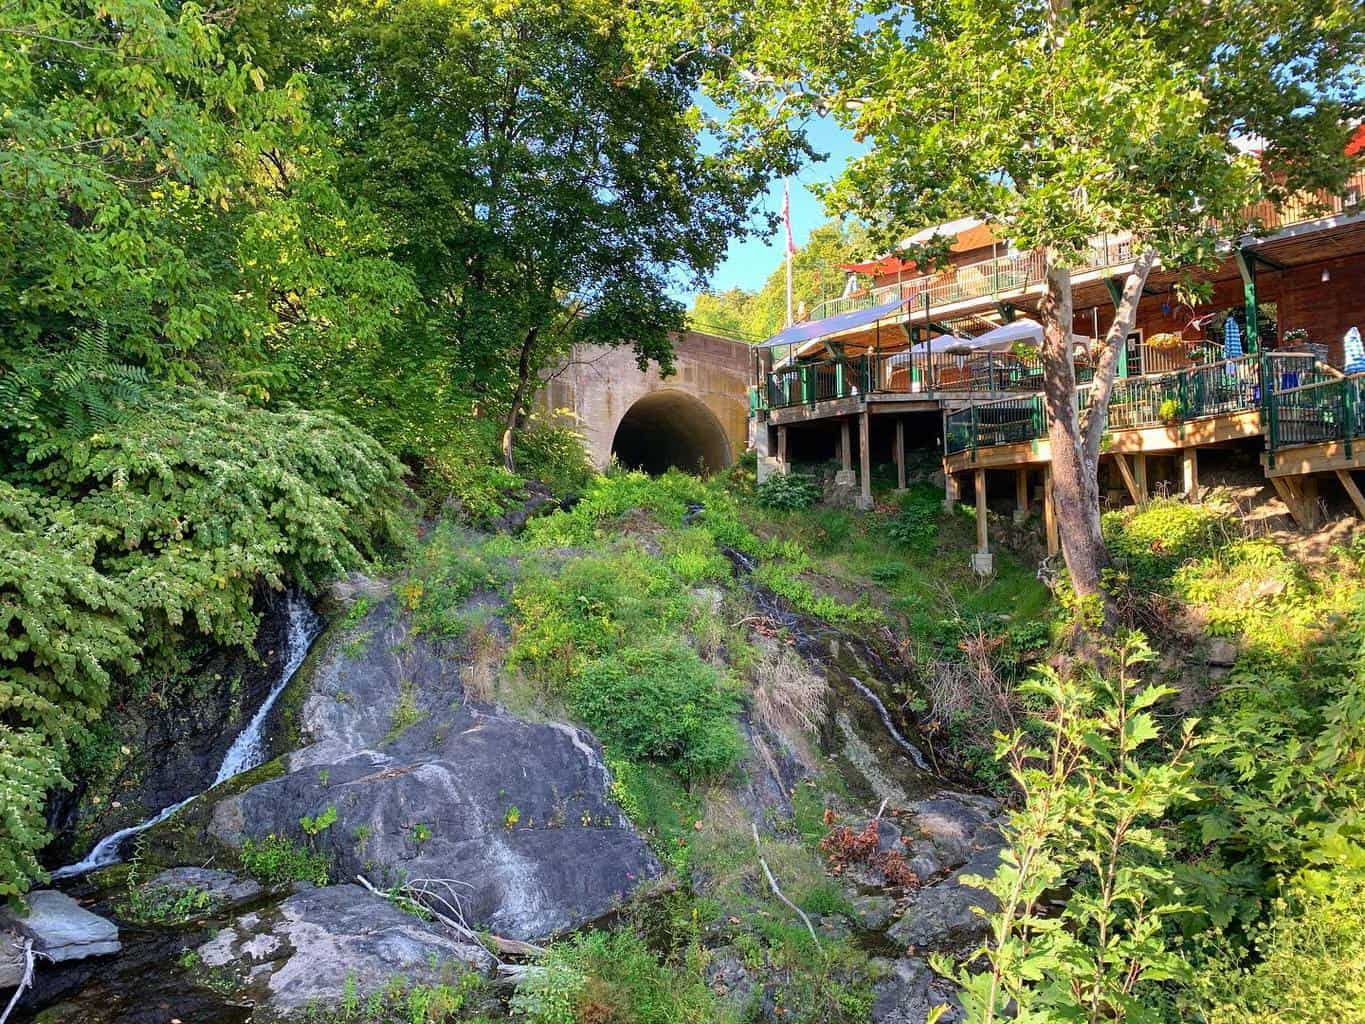 The falcon music venue in upstate, ny has terrace overlooking a waterfall and lots of greenery.